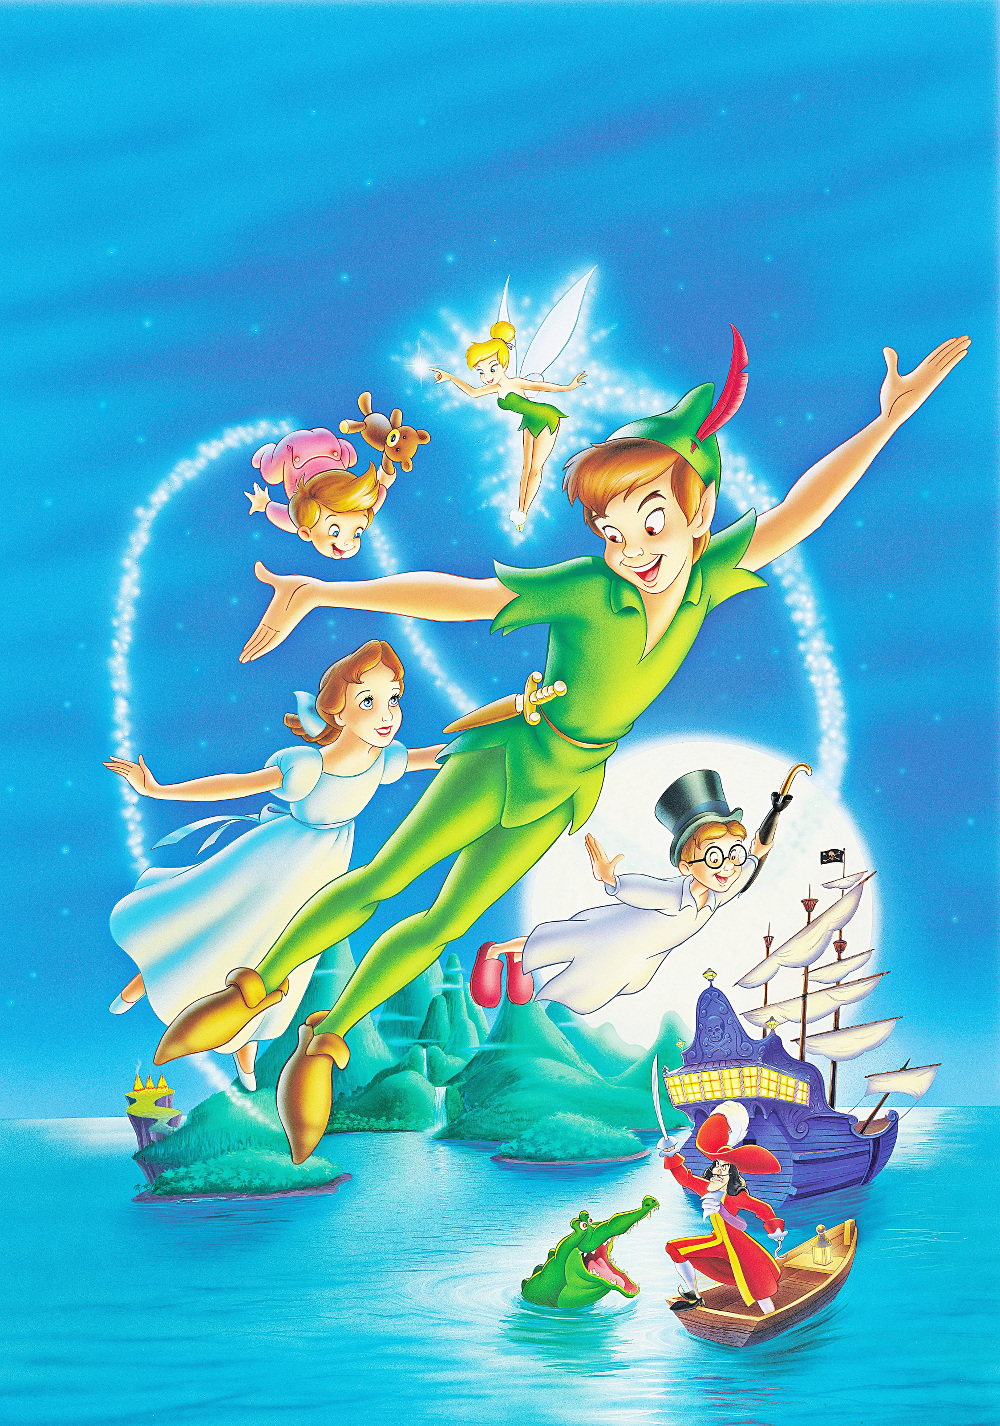 Peter Pan (1953) Picture